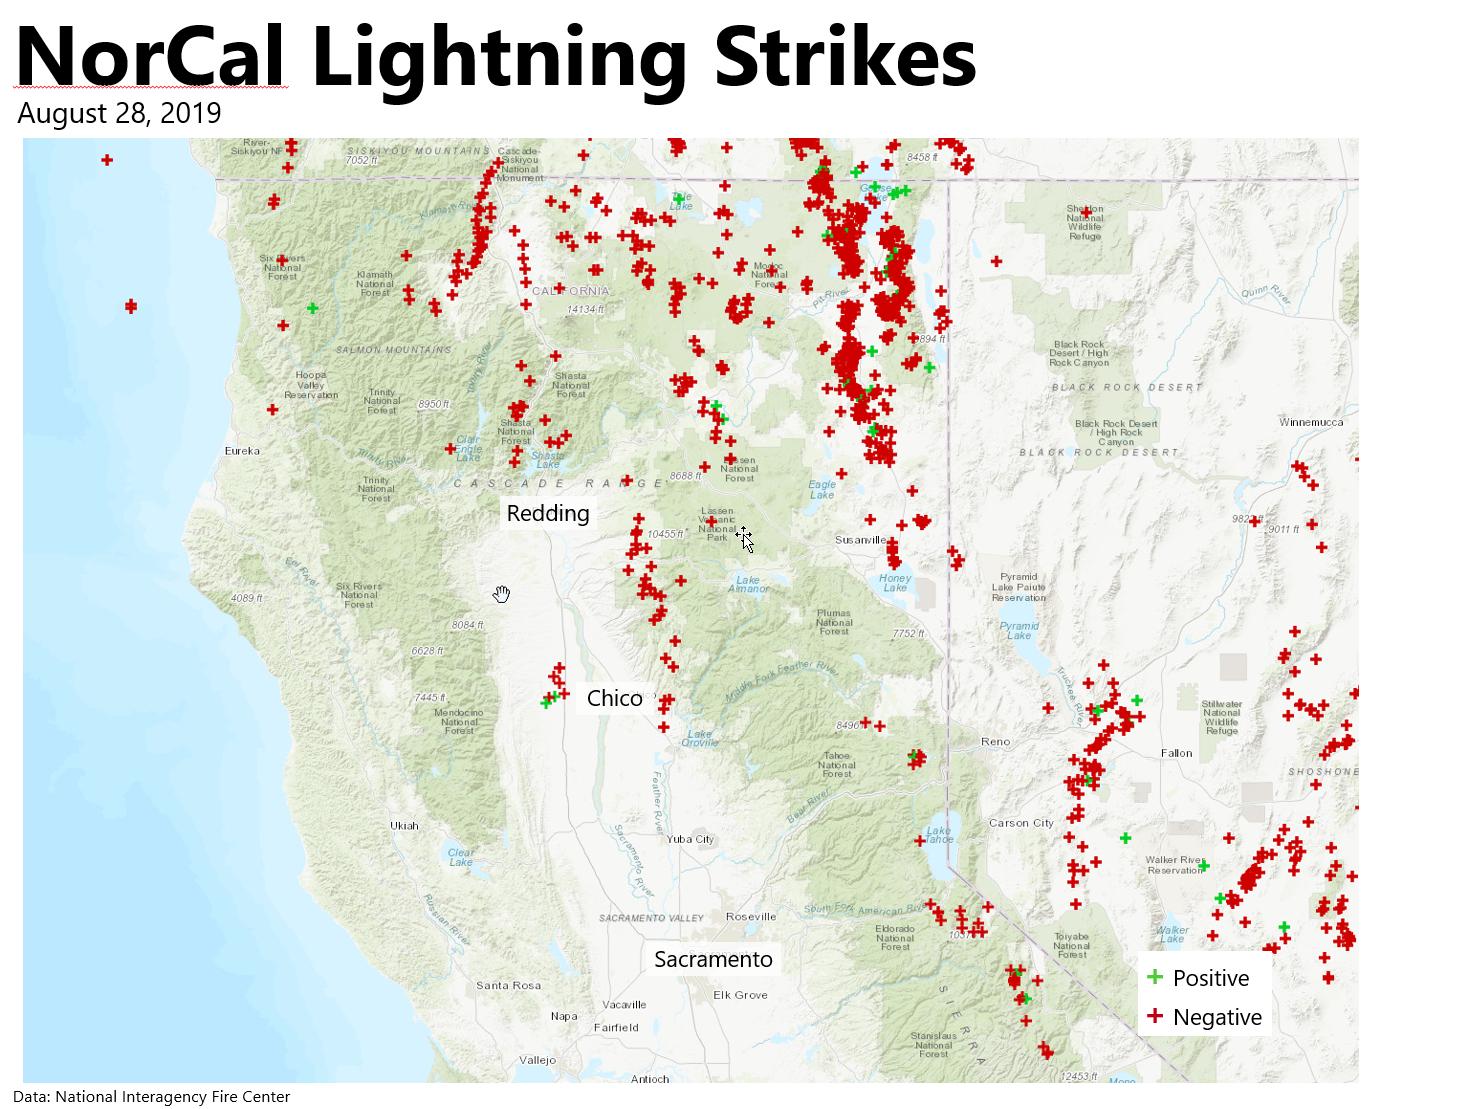 Lightning storms move across Northern California: See where strikes hit